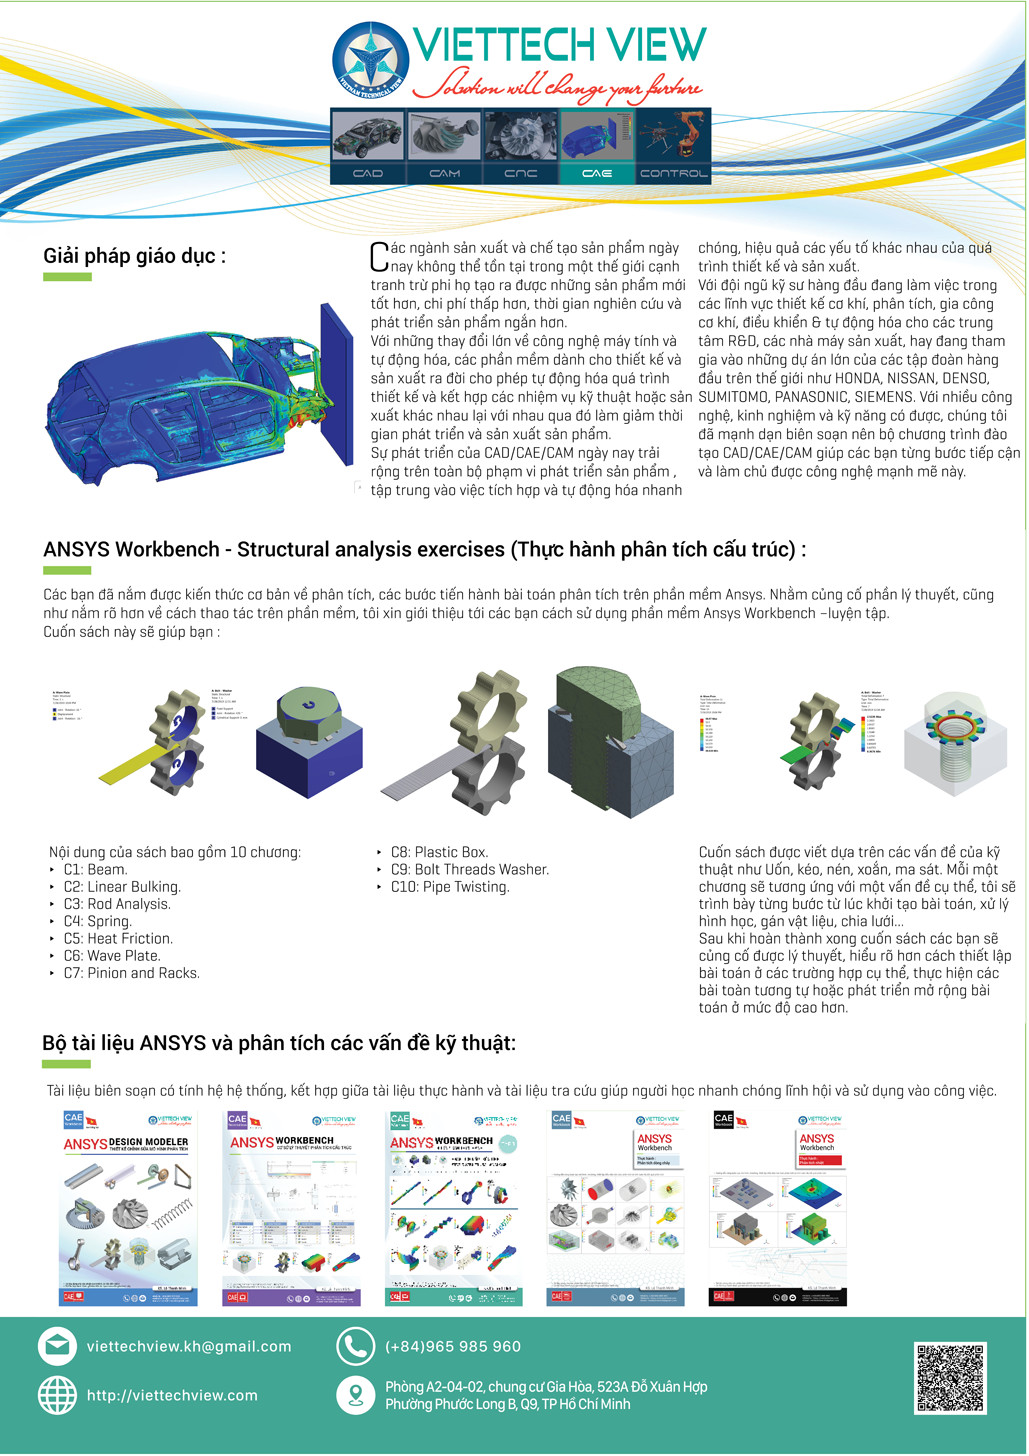 ANSYS Workbench_Sructural analysis exercises_Back cover_-08-11-2019-14-20-30.jpg